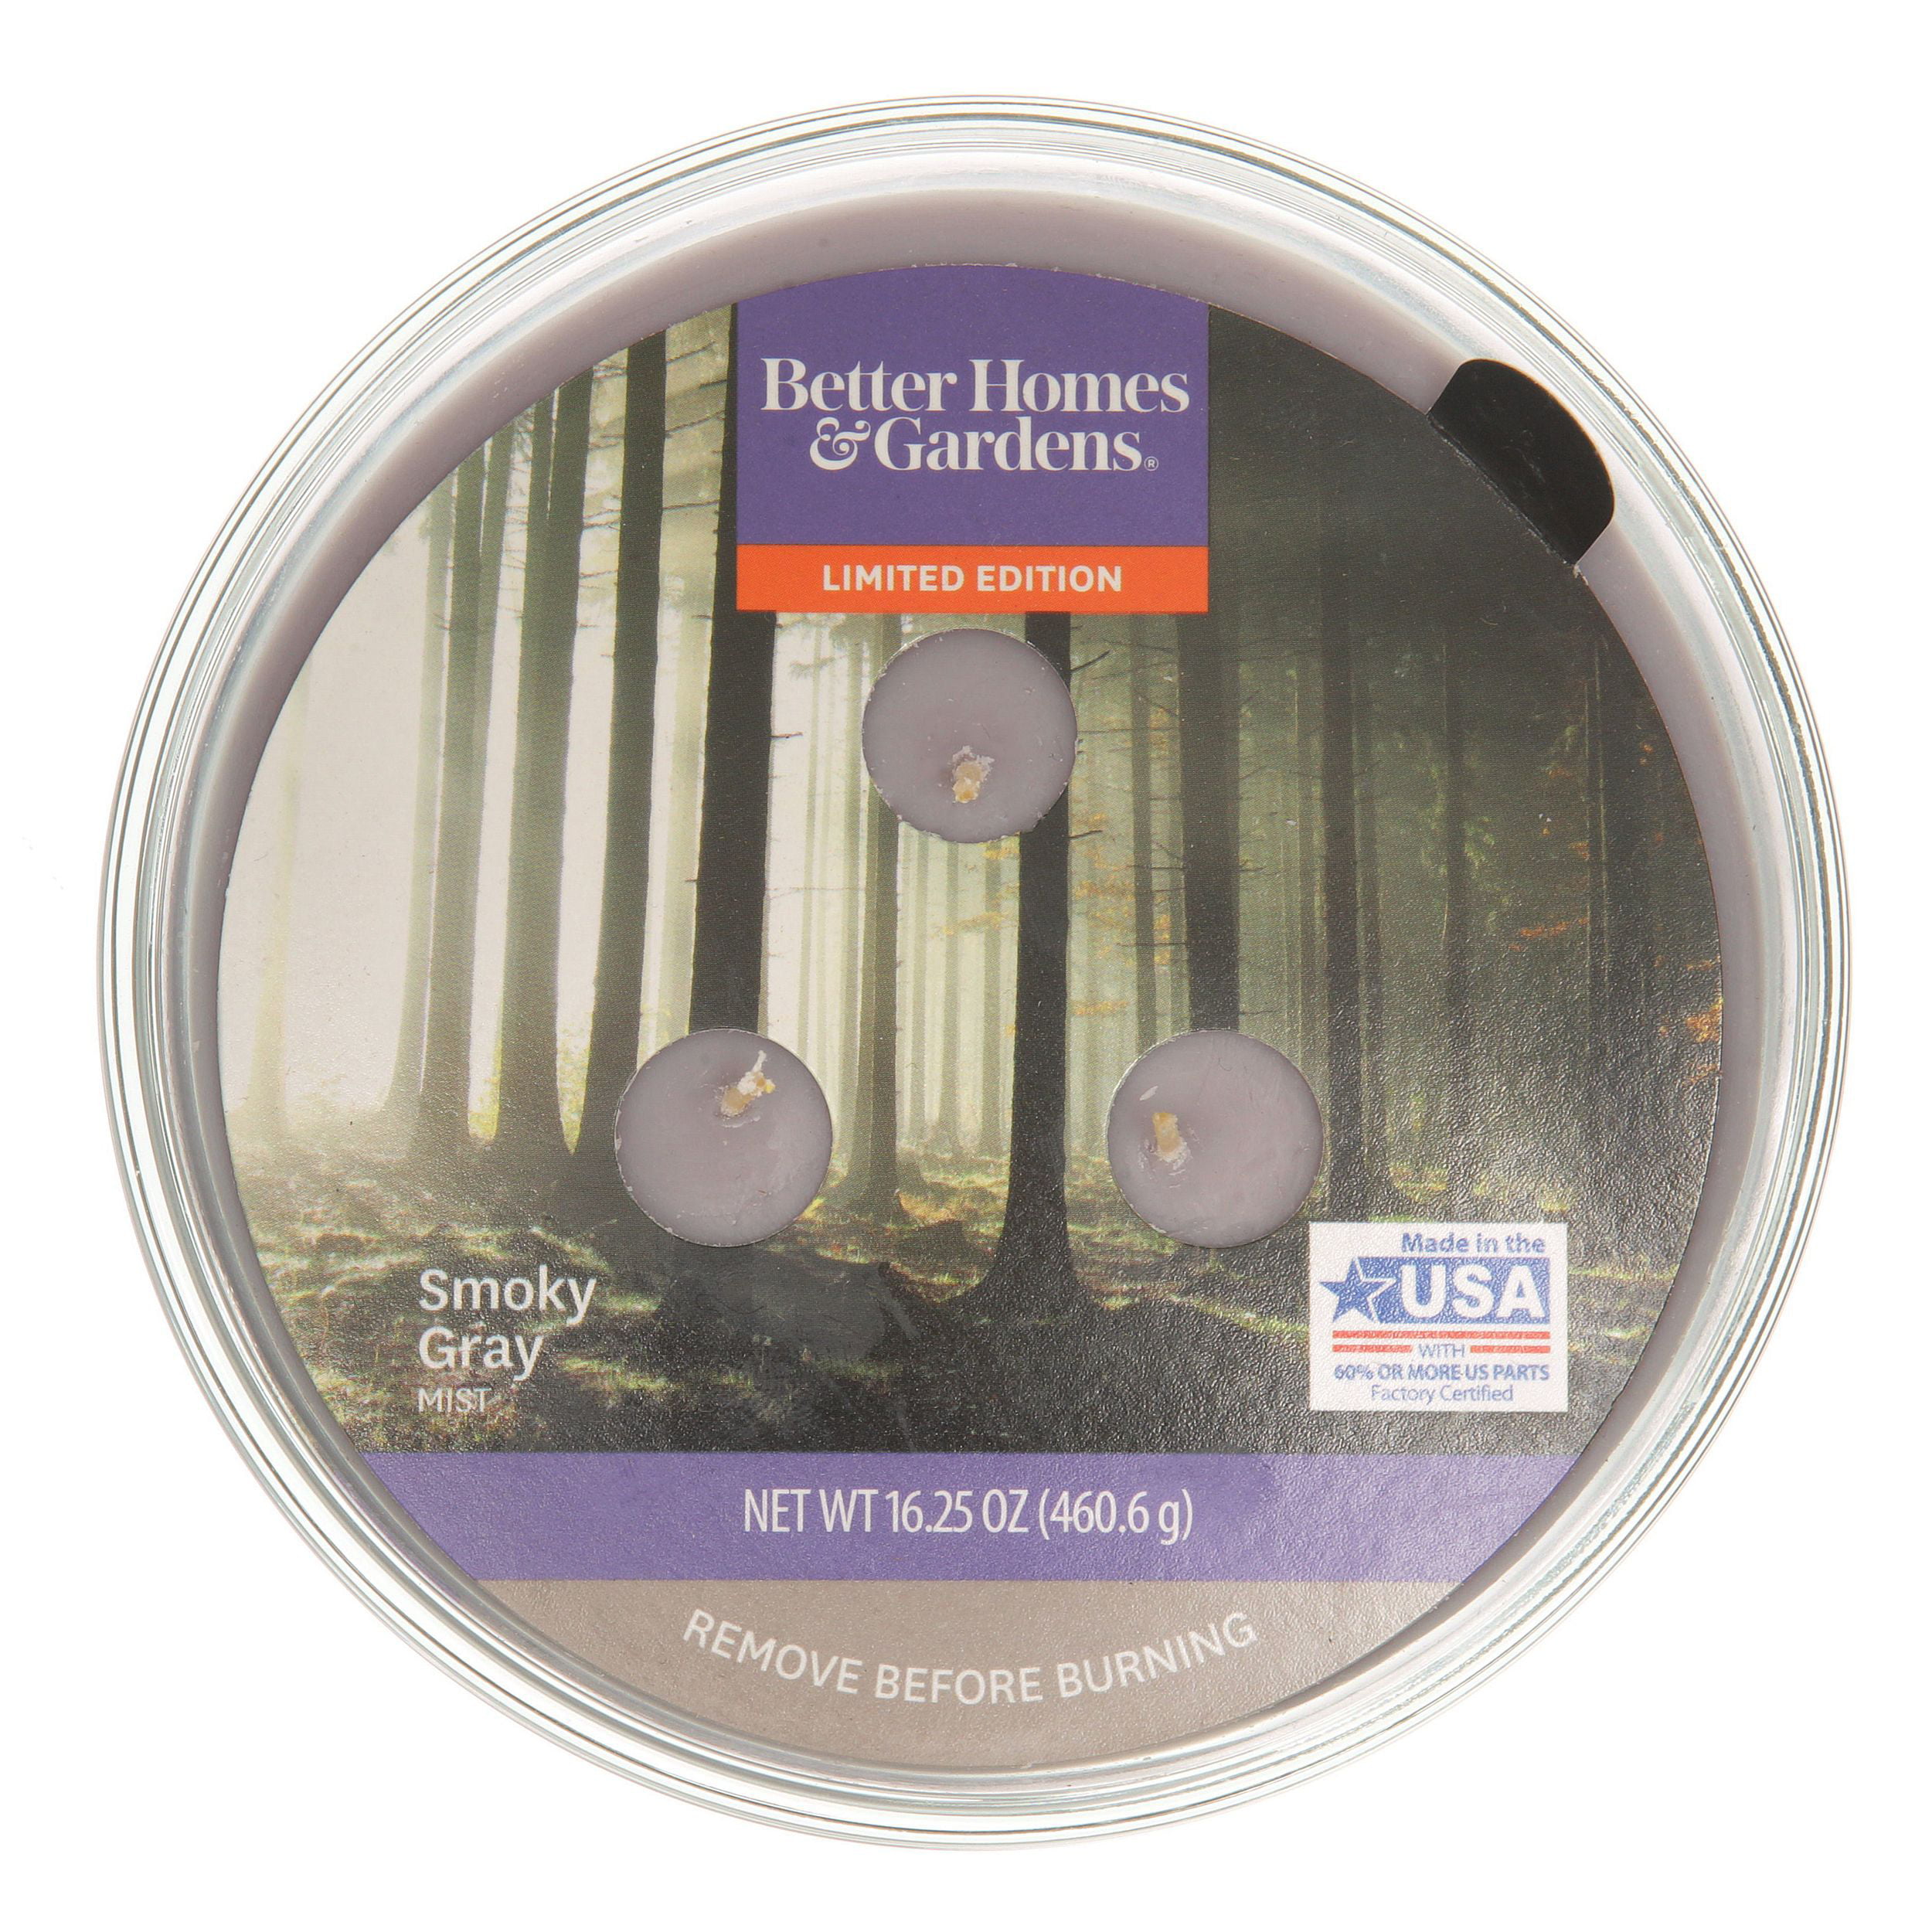 1 Better Homes & Gardens SMOKY GRAY MIST Large Jar Candle 18 oz 